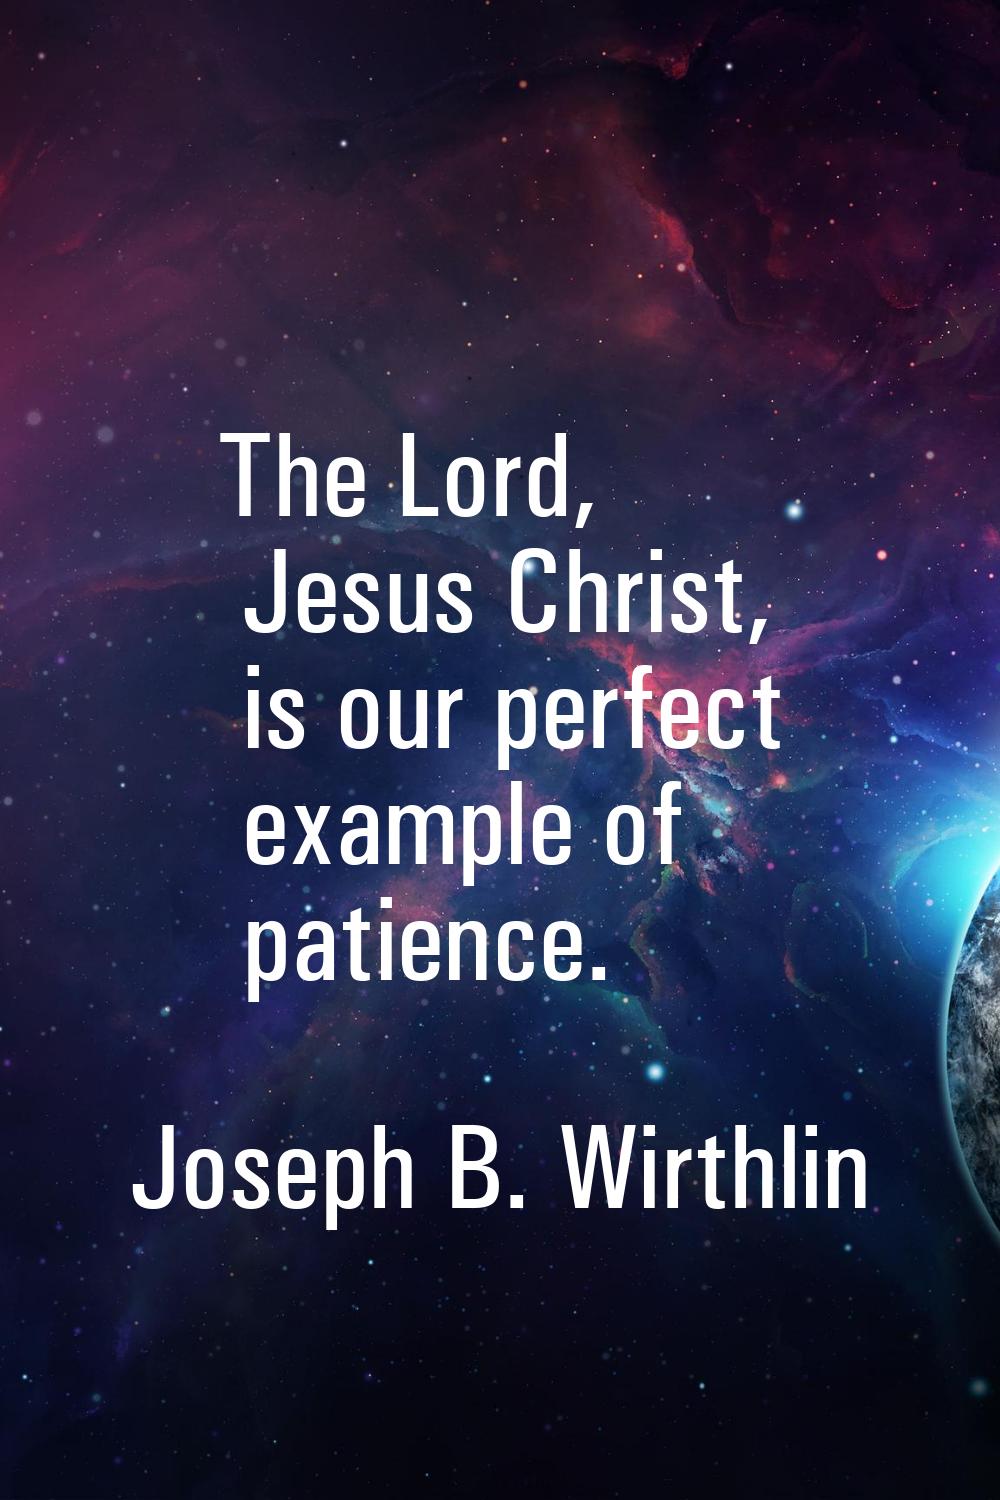 The Lord, Jesus Christ, is our perfect example of patience.